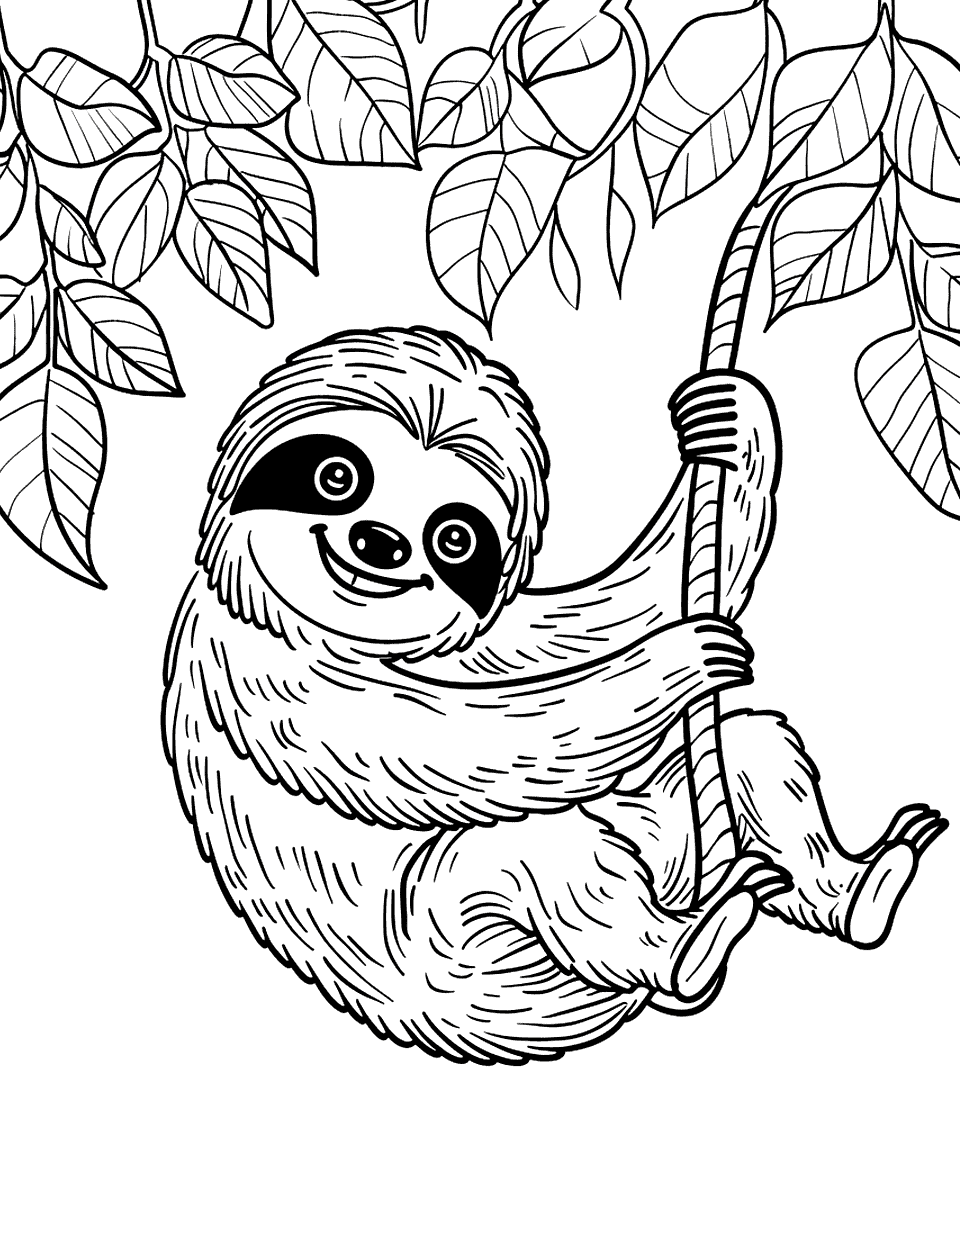 Playful Sloth Swinging on a Rope Coloring Page - A fun depiction of a sloth playfully swinging from a rope tied to a tree branch, with a clear sky background.